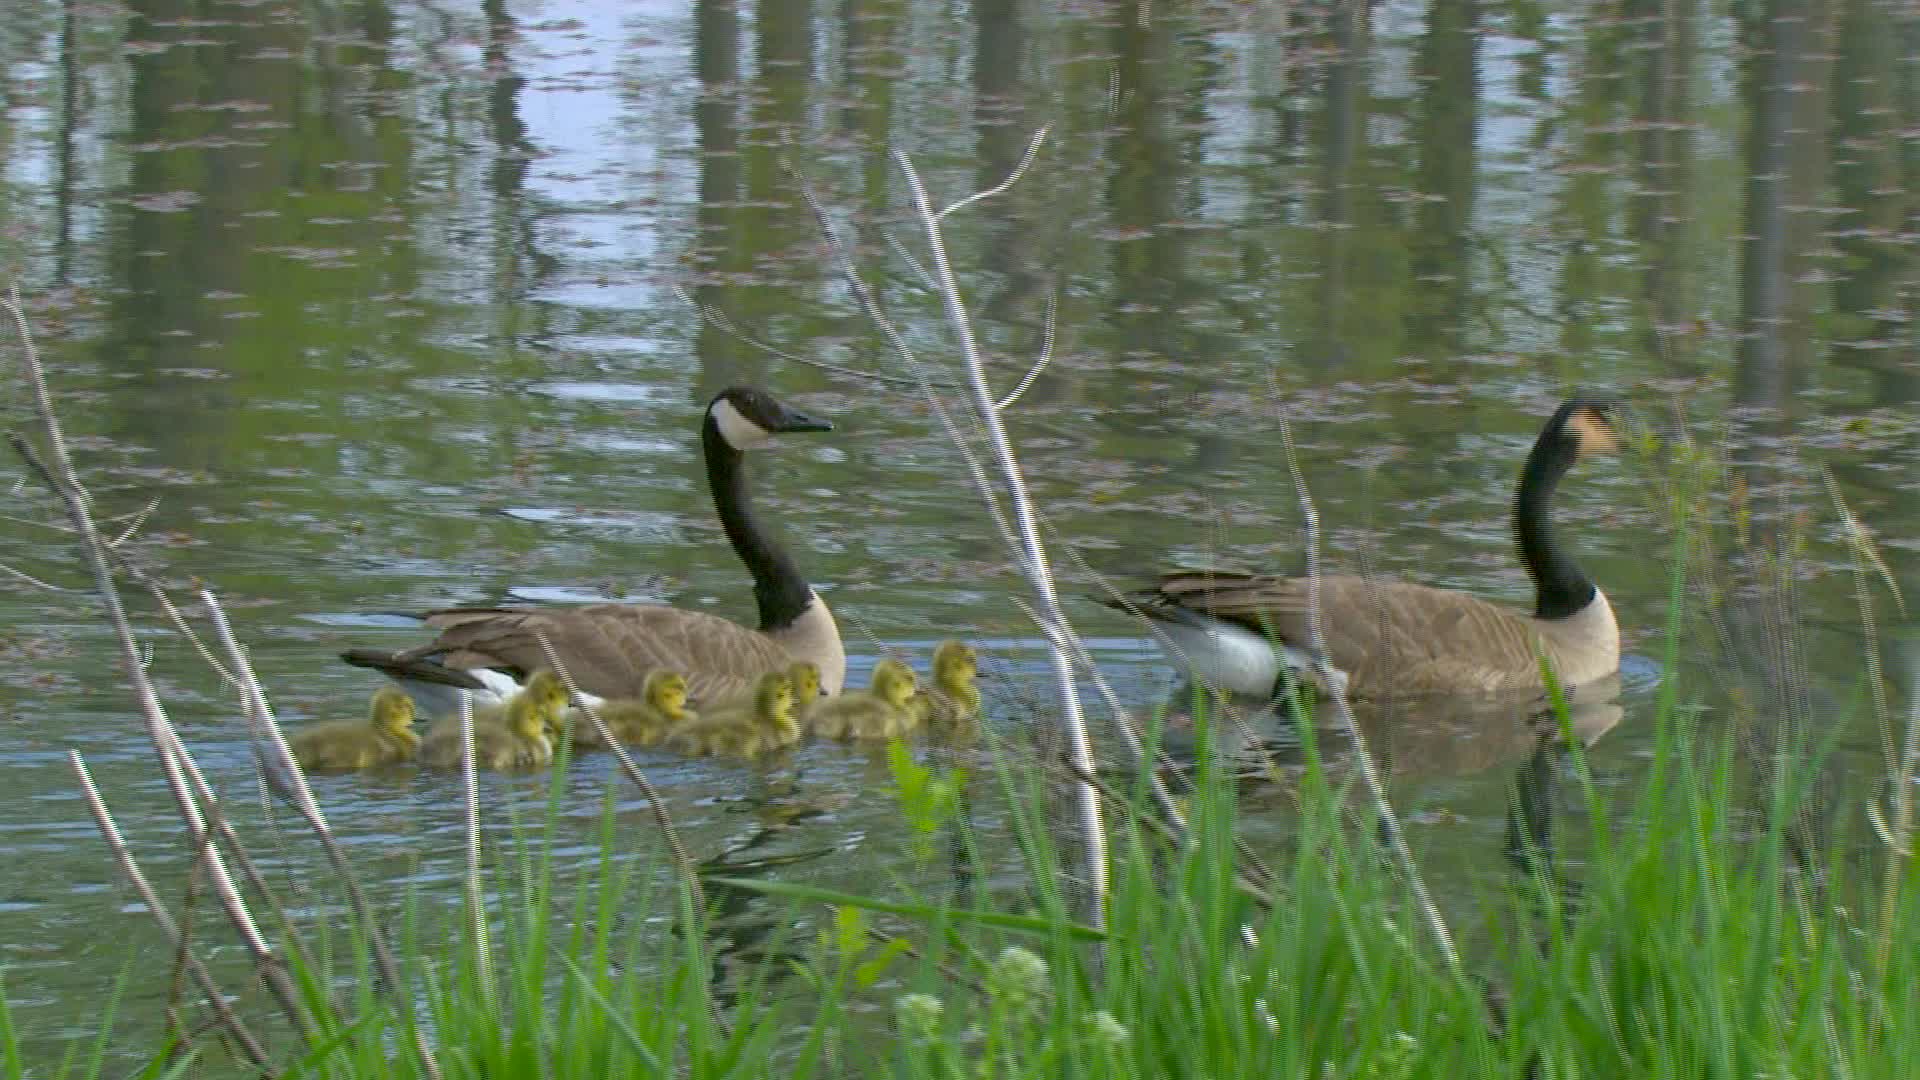 ducks and baby ducks are swimming on the pond